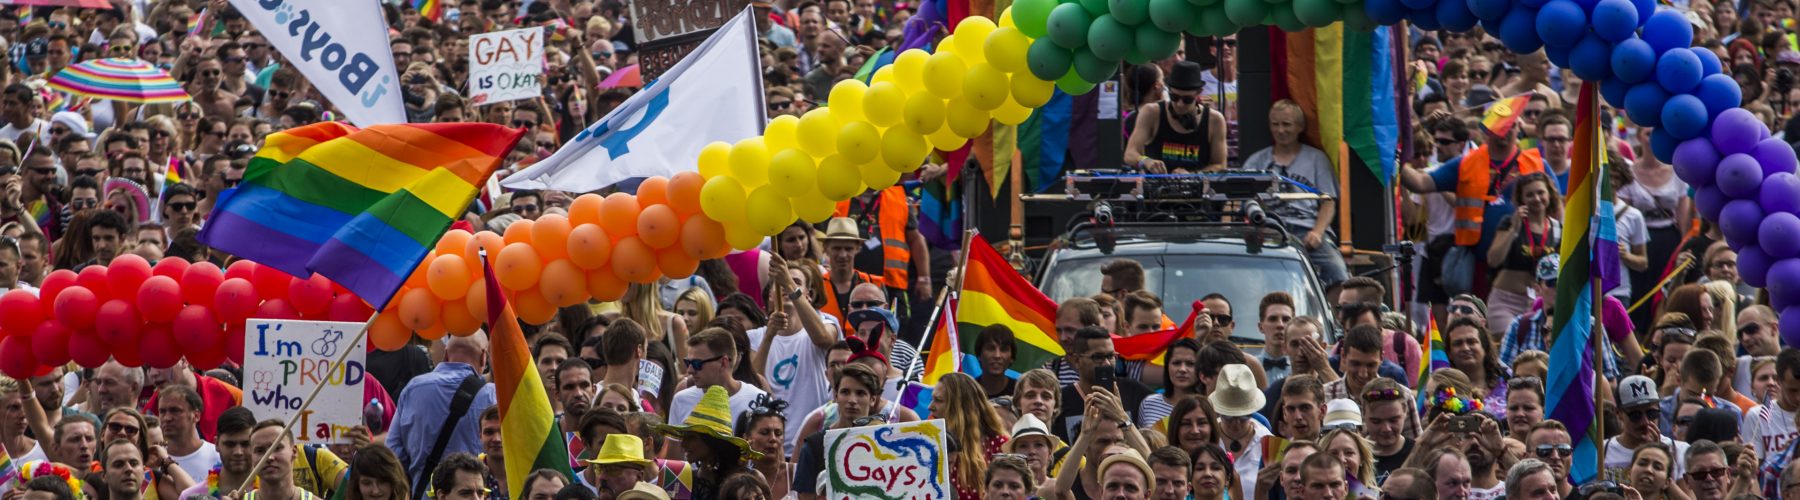 PRAGUE, CZECH REPUBLIC - AUGUST 15:  Participants attend the Prague Pride March on August 15, 2015 in Prague, Czech Republic. More than ten thousand people marched through city centre in support of lesbian, gay, bisexual and transgenders (LGBT) rights.  (Photo by Matej Divizna/Getty Images)